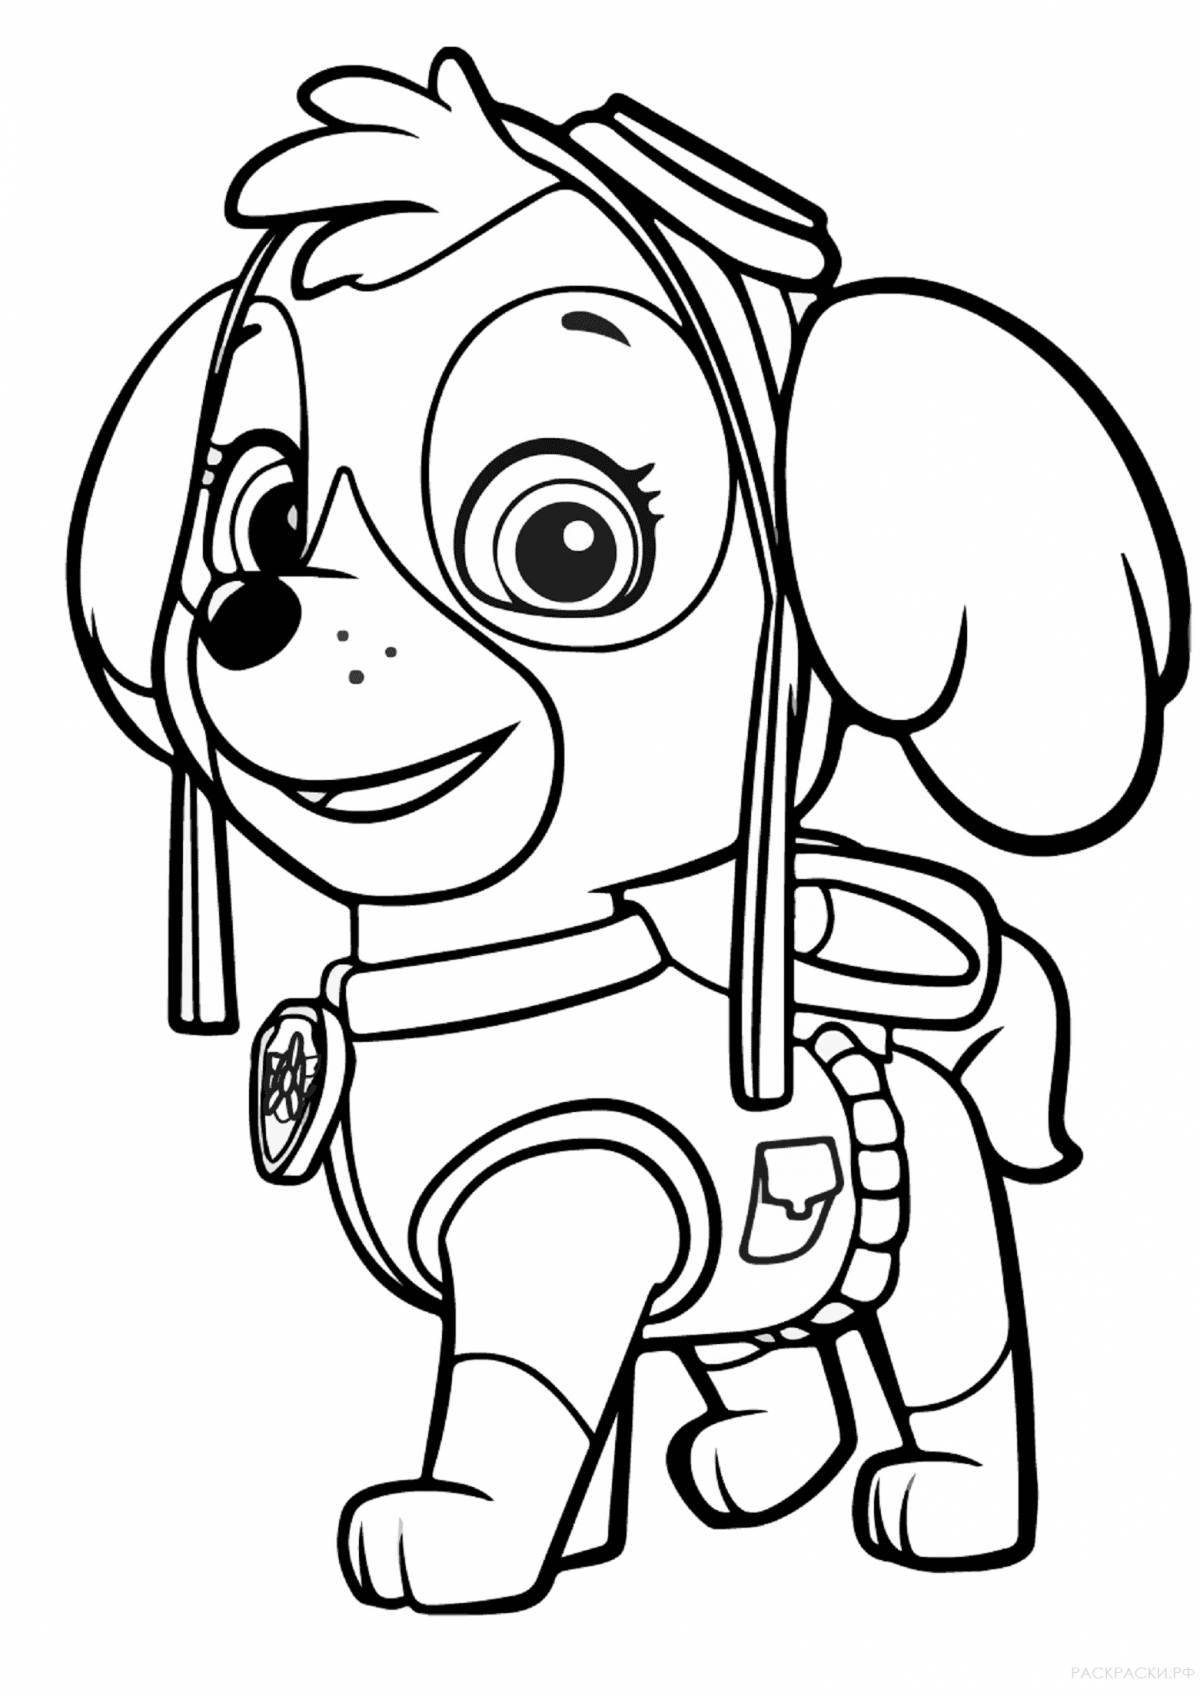 Fairytale Paw Patrol coloring book